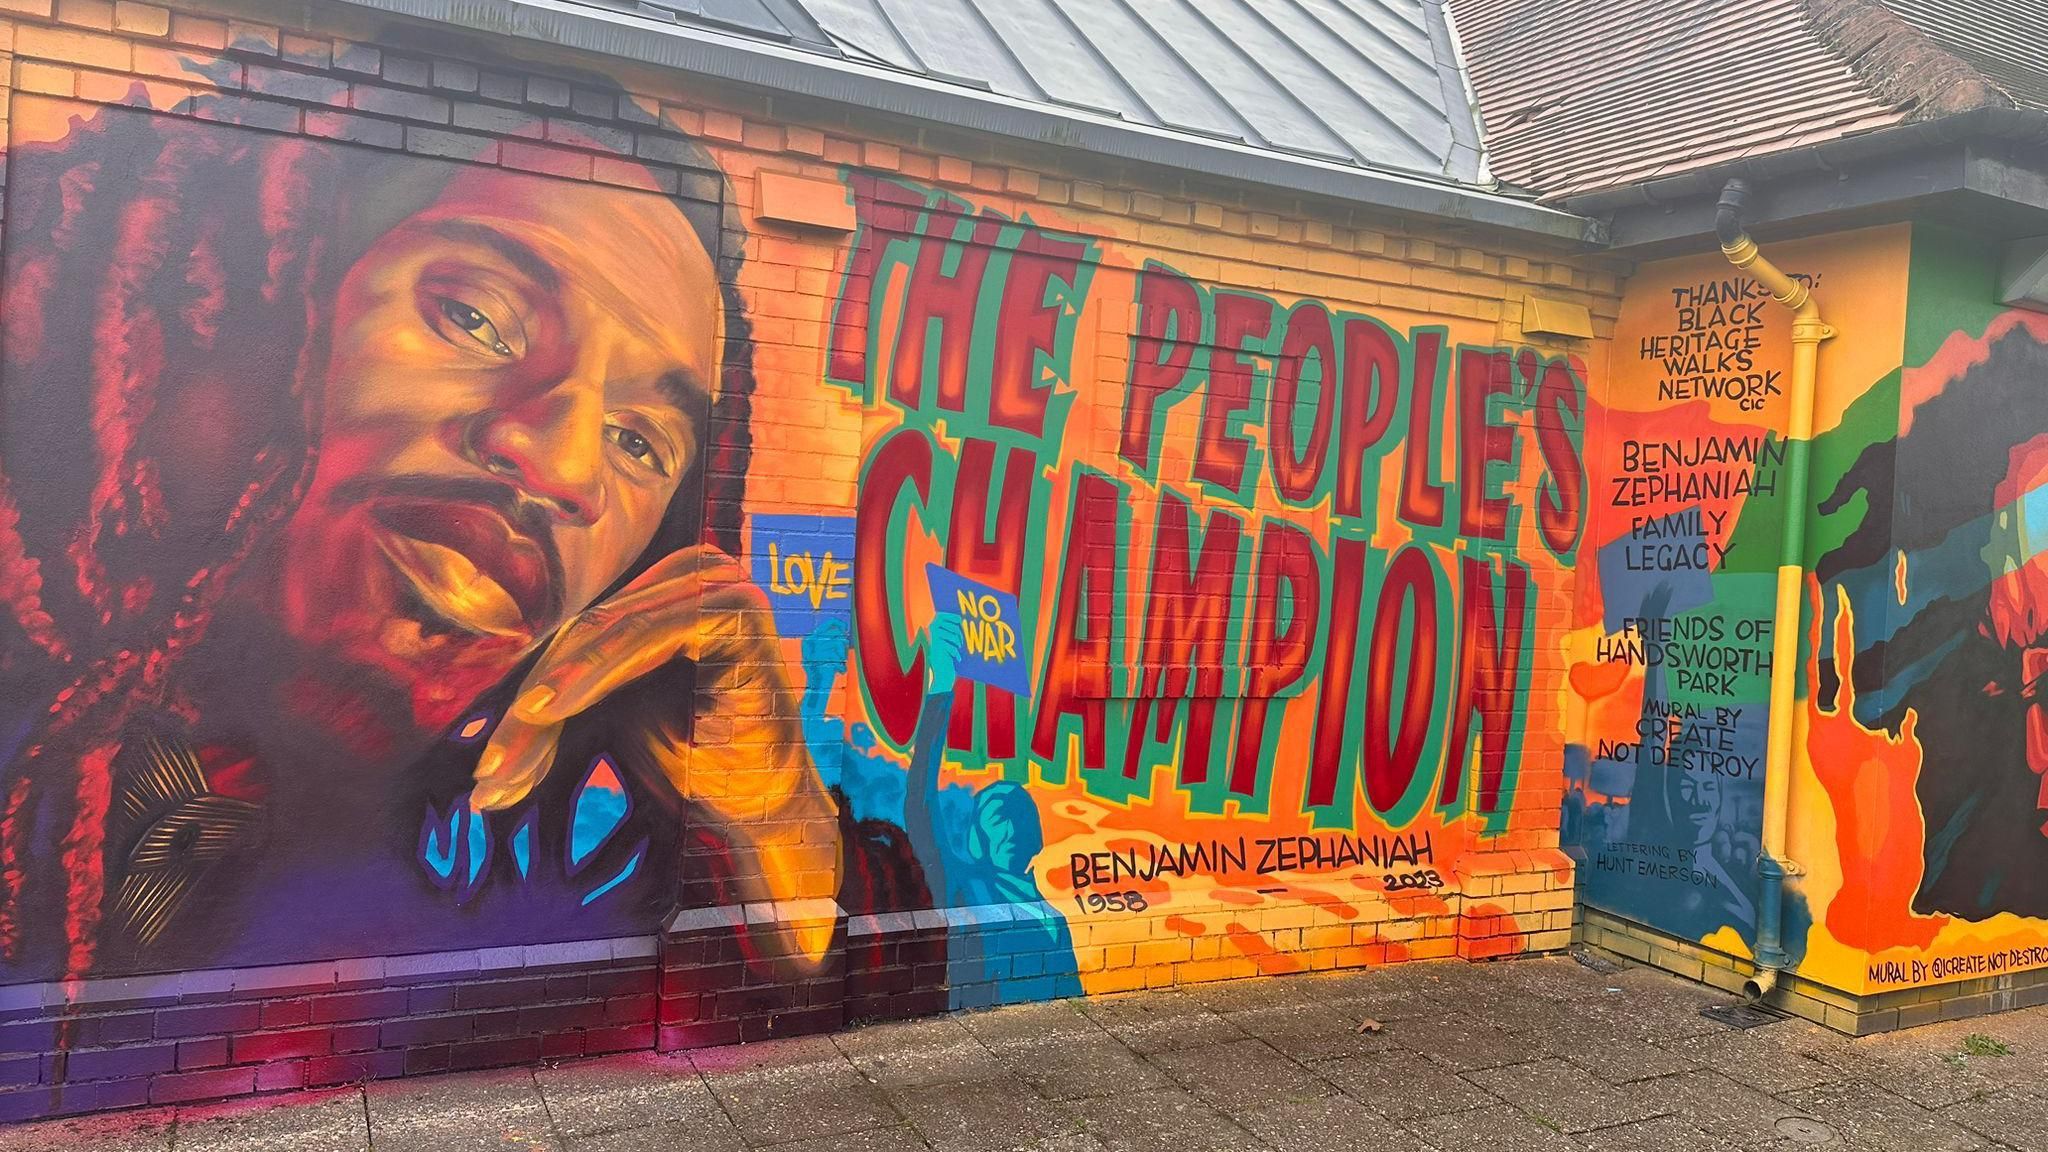 The new mural